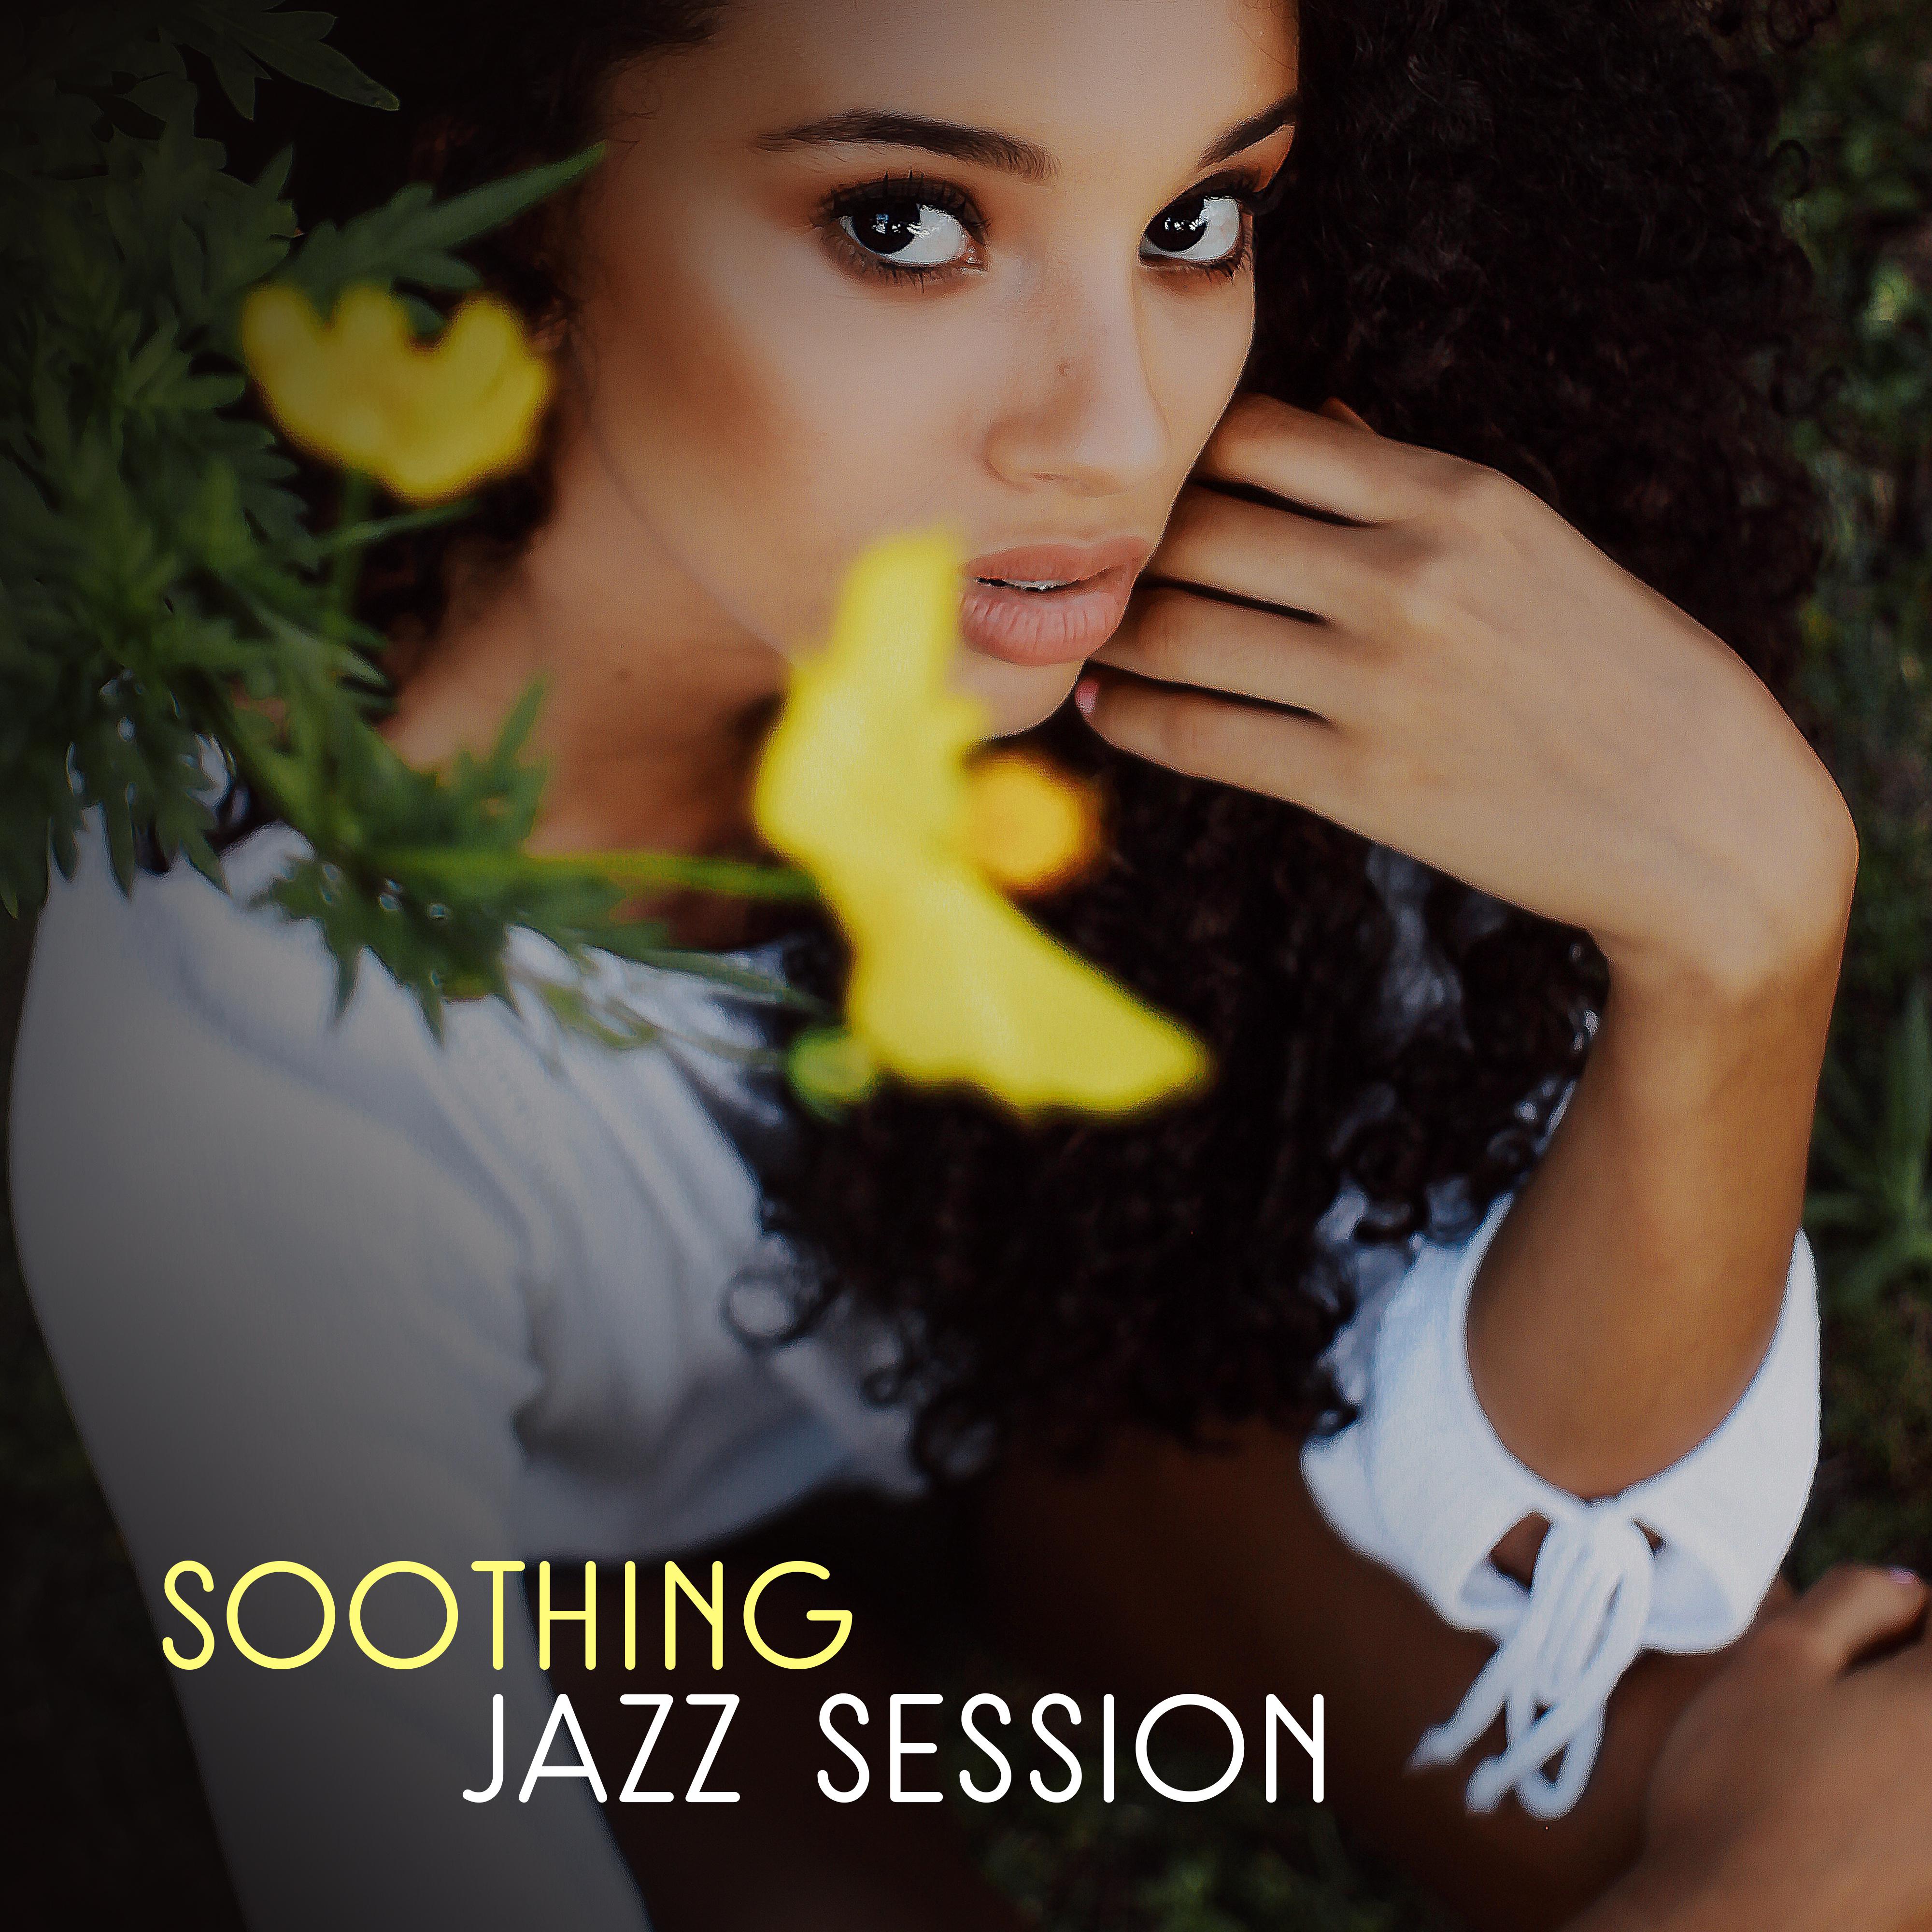 Soothing Jazz Session  Calming Jazz Music, Night Piano, Relaxed Vibes, Easy Listening